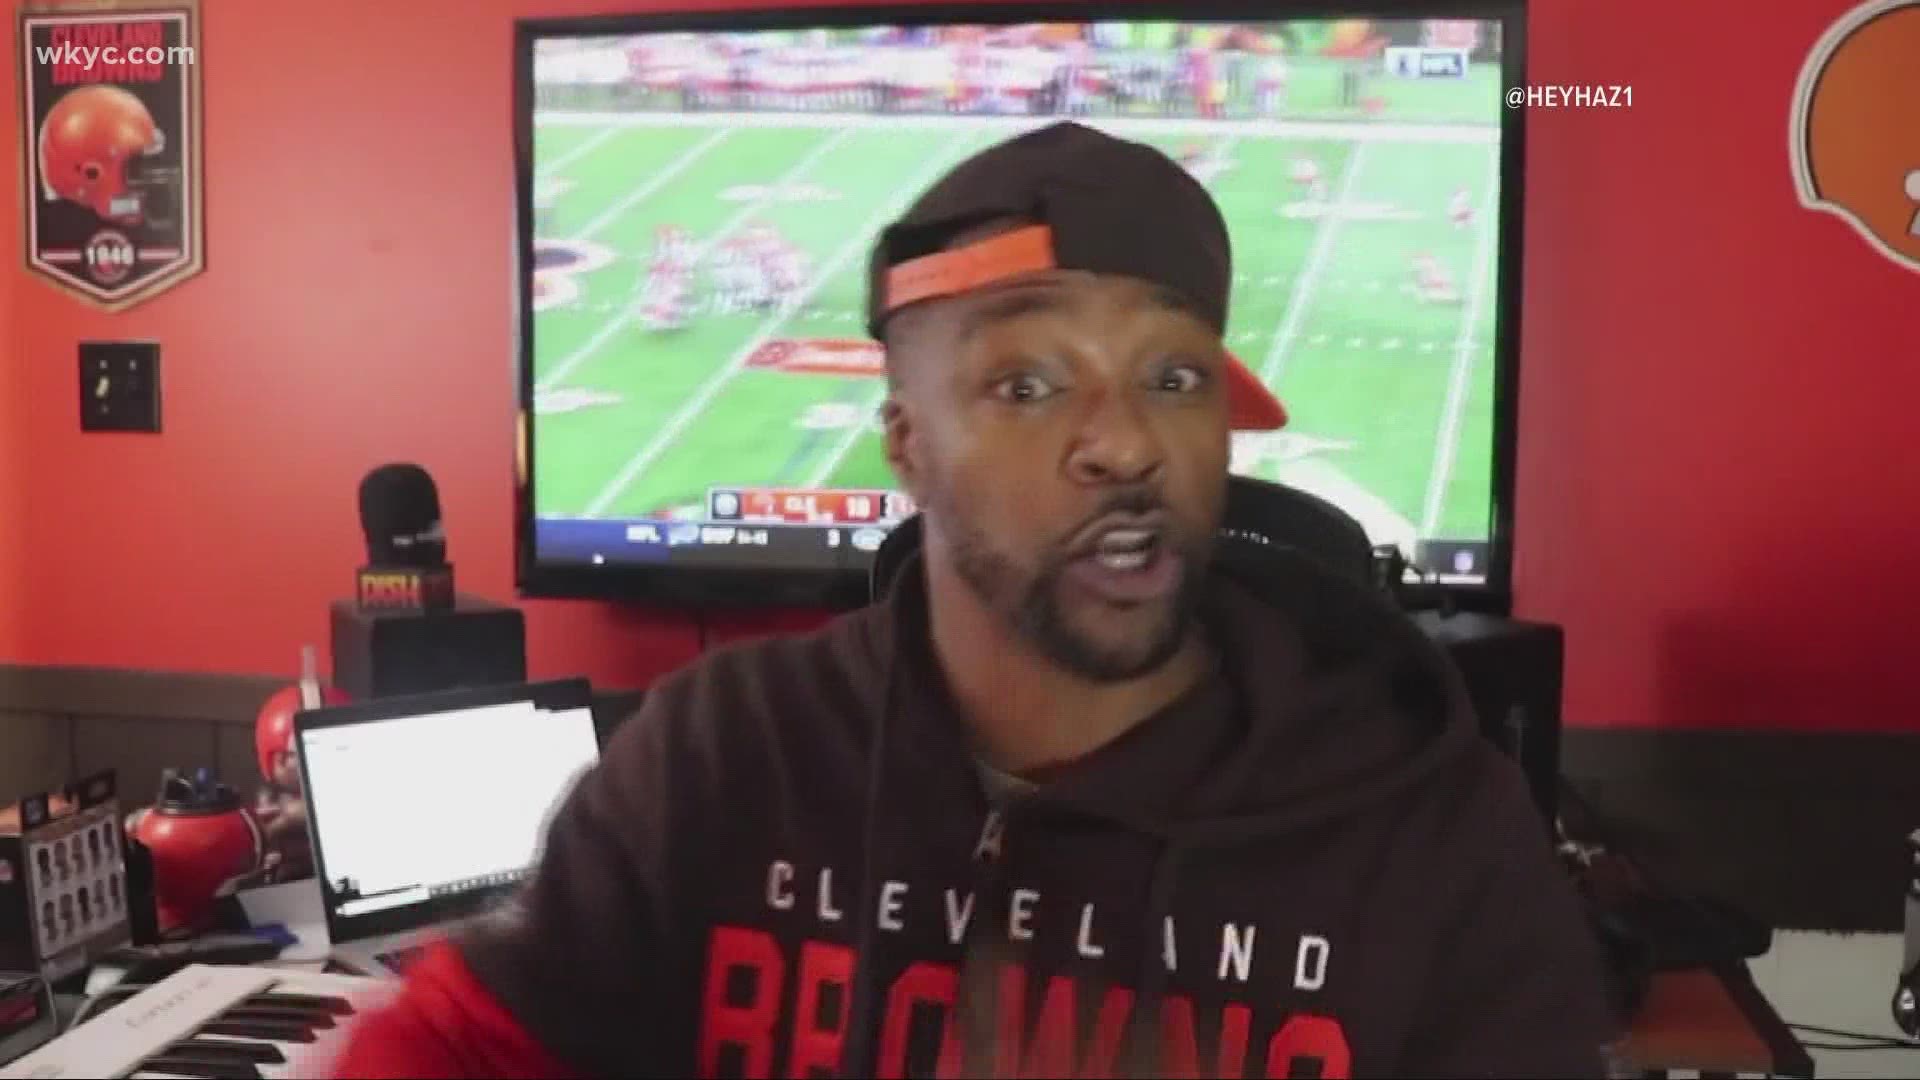 Since last year, DJ HazMatt's music videos have become a weekly tradition during the Cleveland Browns season. The video is set to Mike Jones' "Back Then."